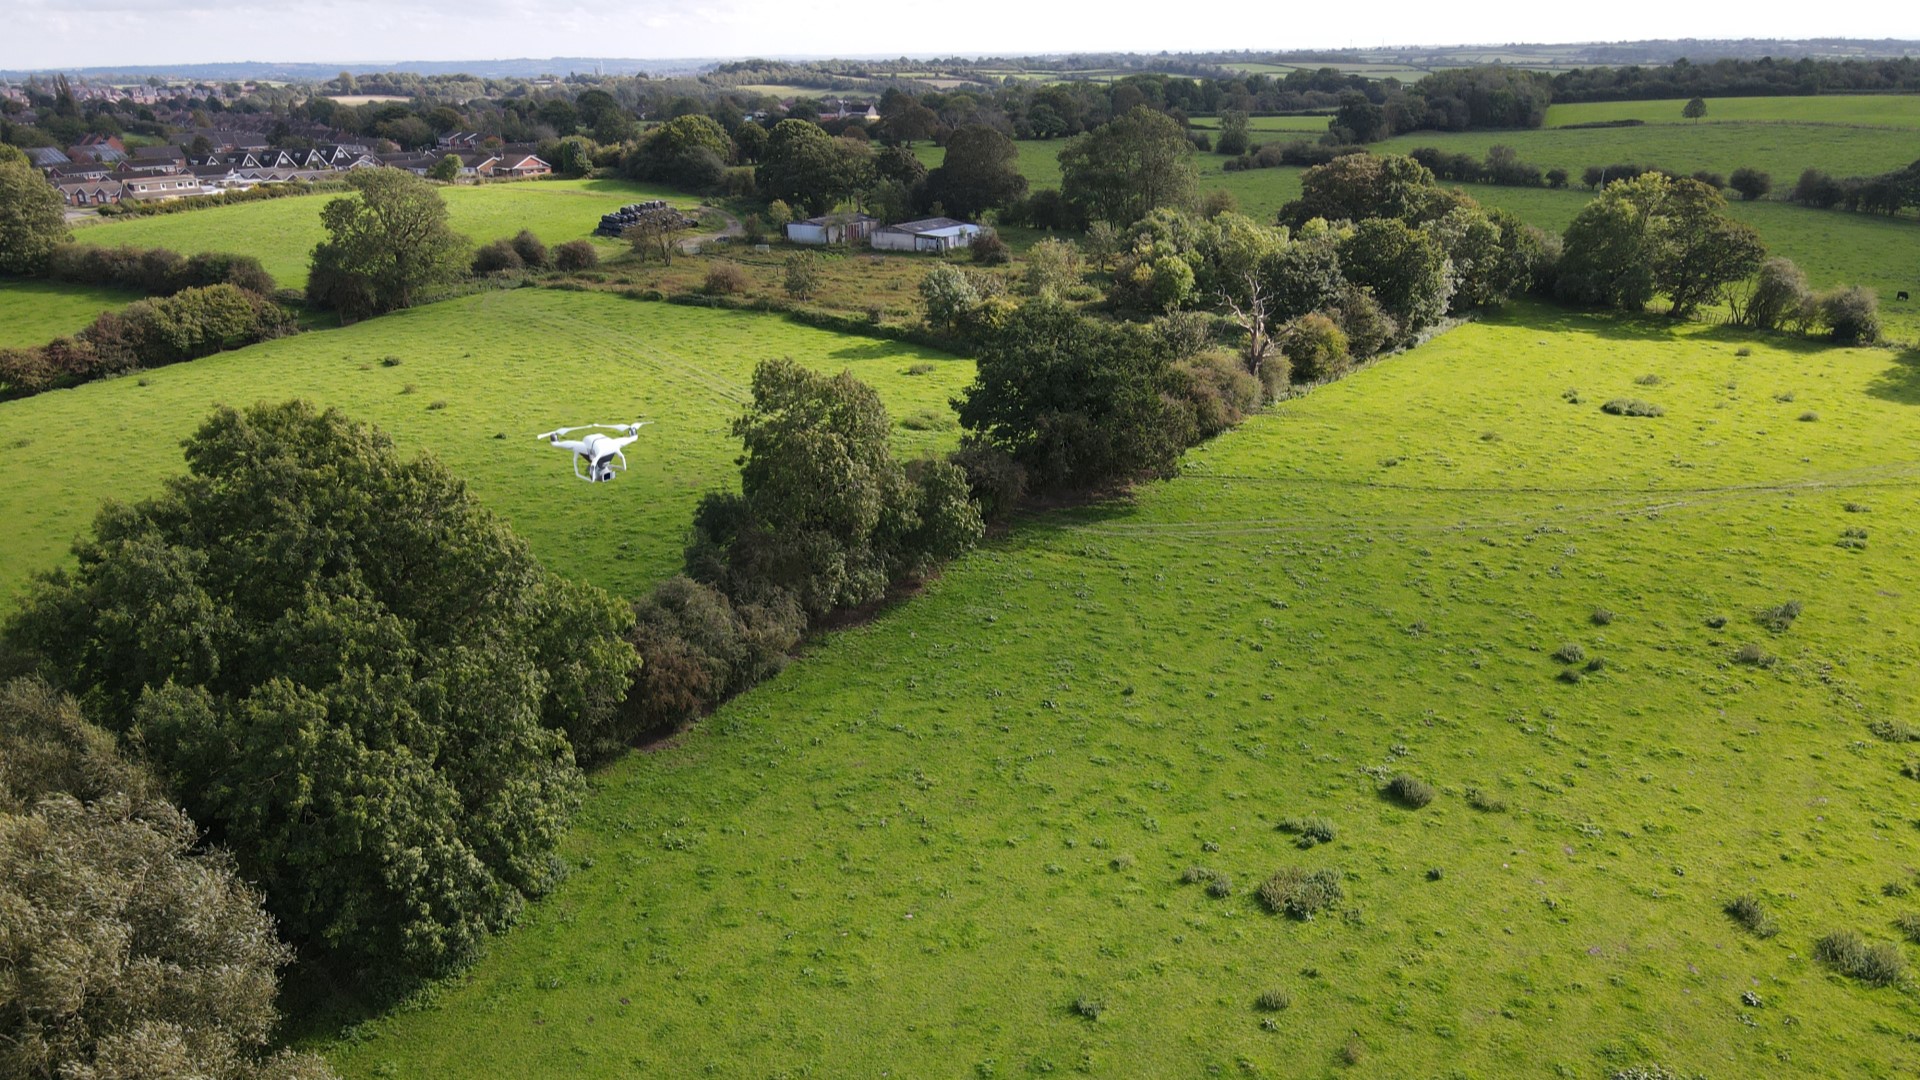 Drone Survey Services in the UK